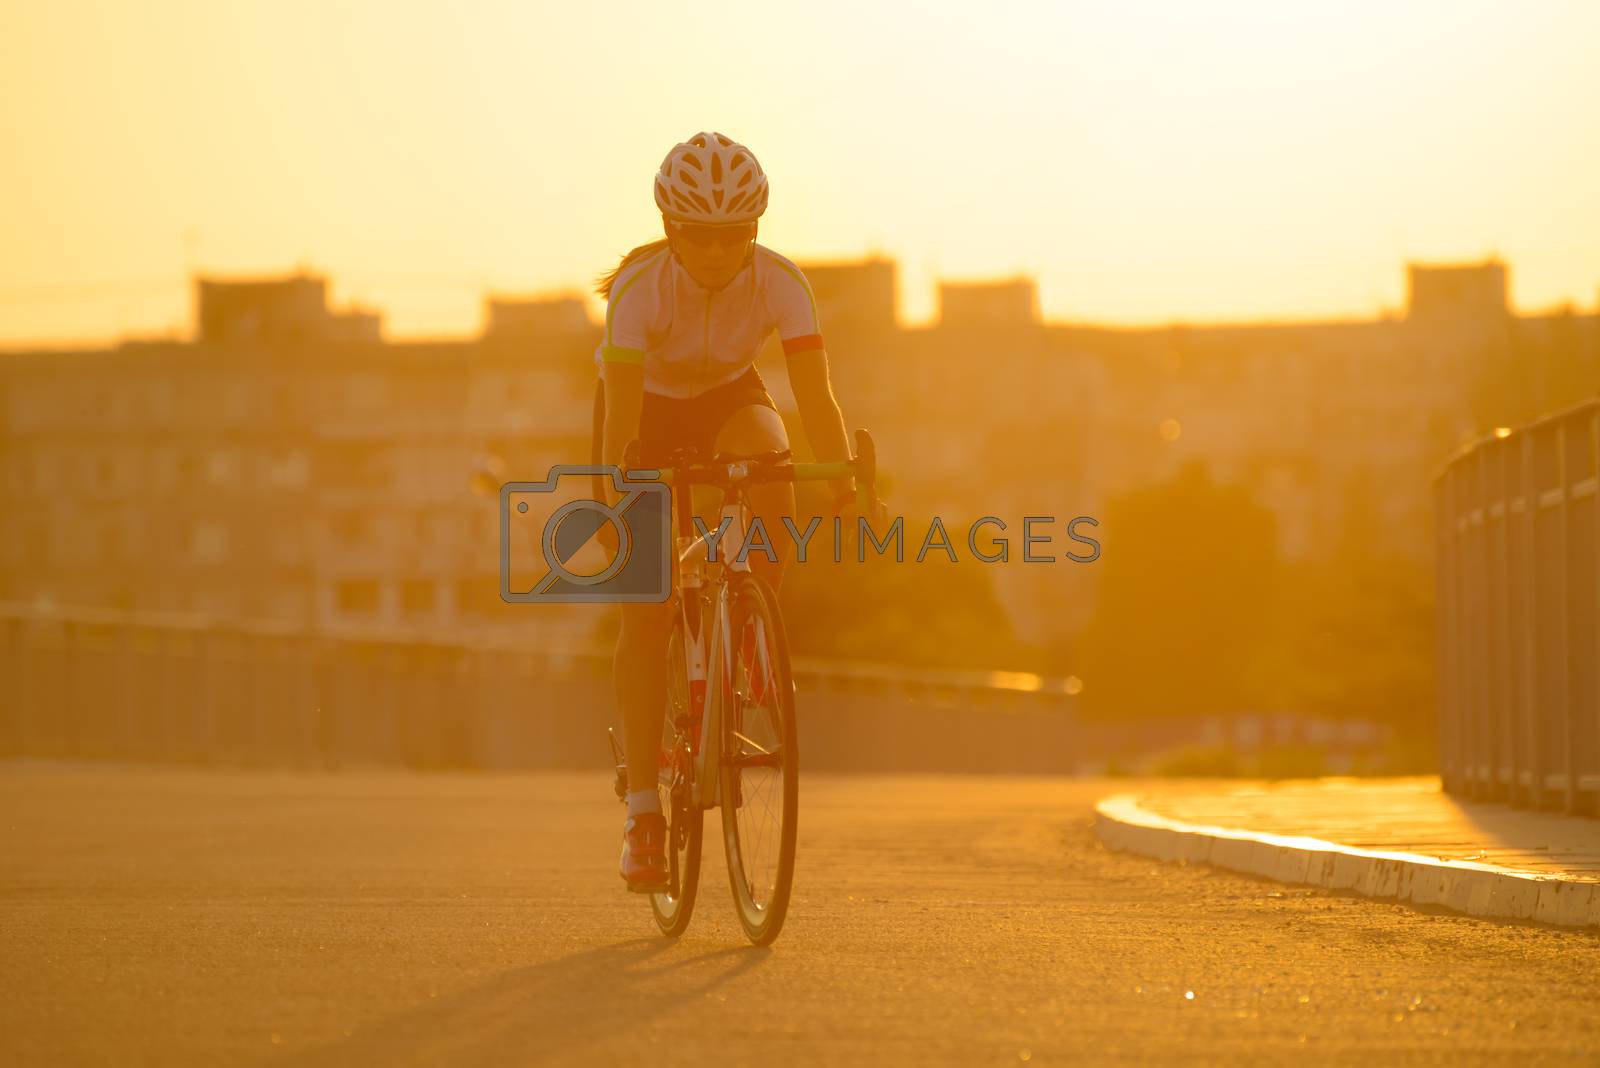 Royalty free image of Young Woman Riding Road Bicycle on Free Street in the City at Sunset. Healthy Lifestyle and Sport Concept. by maxpro